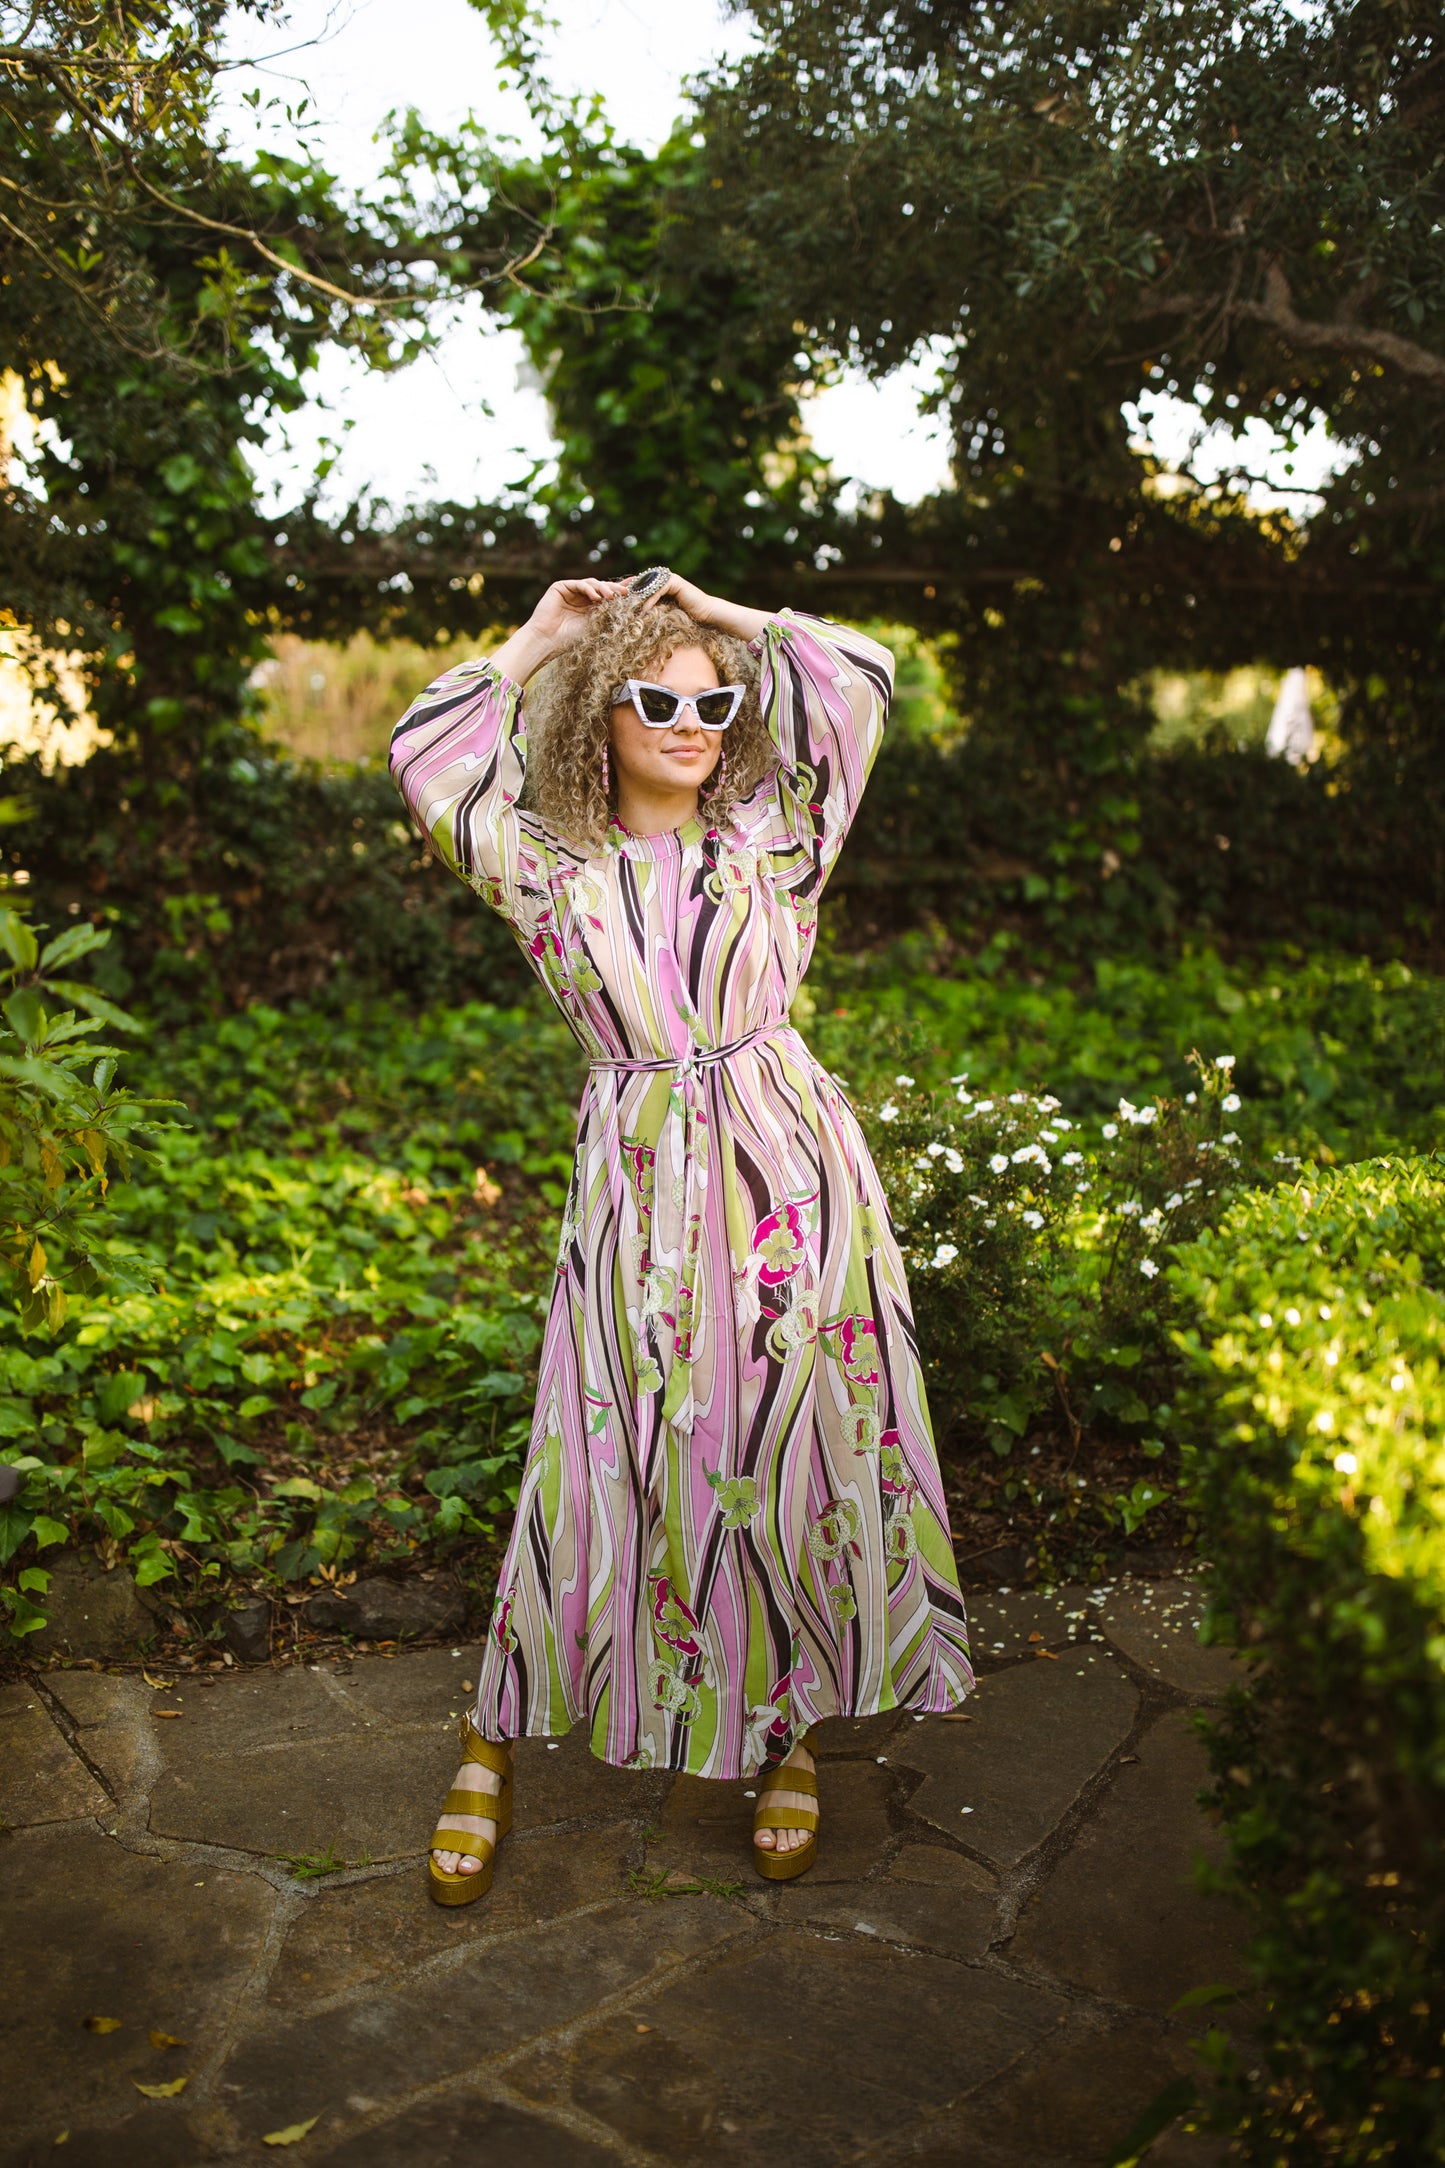 jennafer grace Psychelilies Roper Maxi Dress semi-sheer bubble-gum pink & fuchsia & black & lime green abstract psychedelic mod floral lily print long sleeve dress with high neck cinched waist tie bishop sleeve retro 1960s 60s revival midcentury evening dress boho bohemian hippie romantic whimsical handmade in California USA